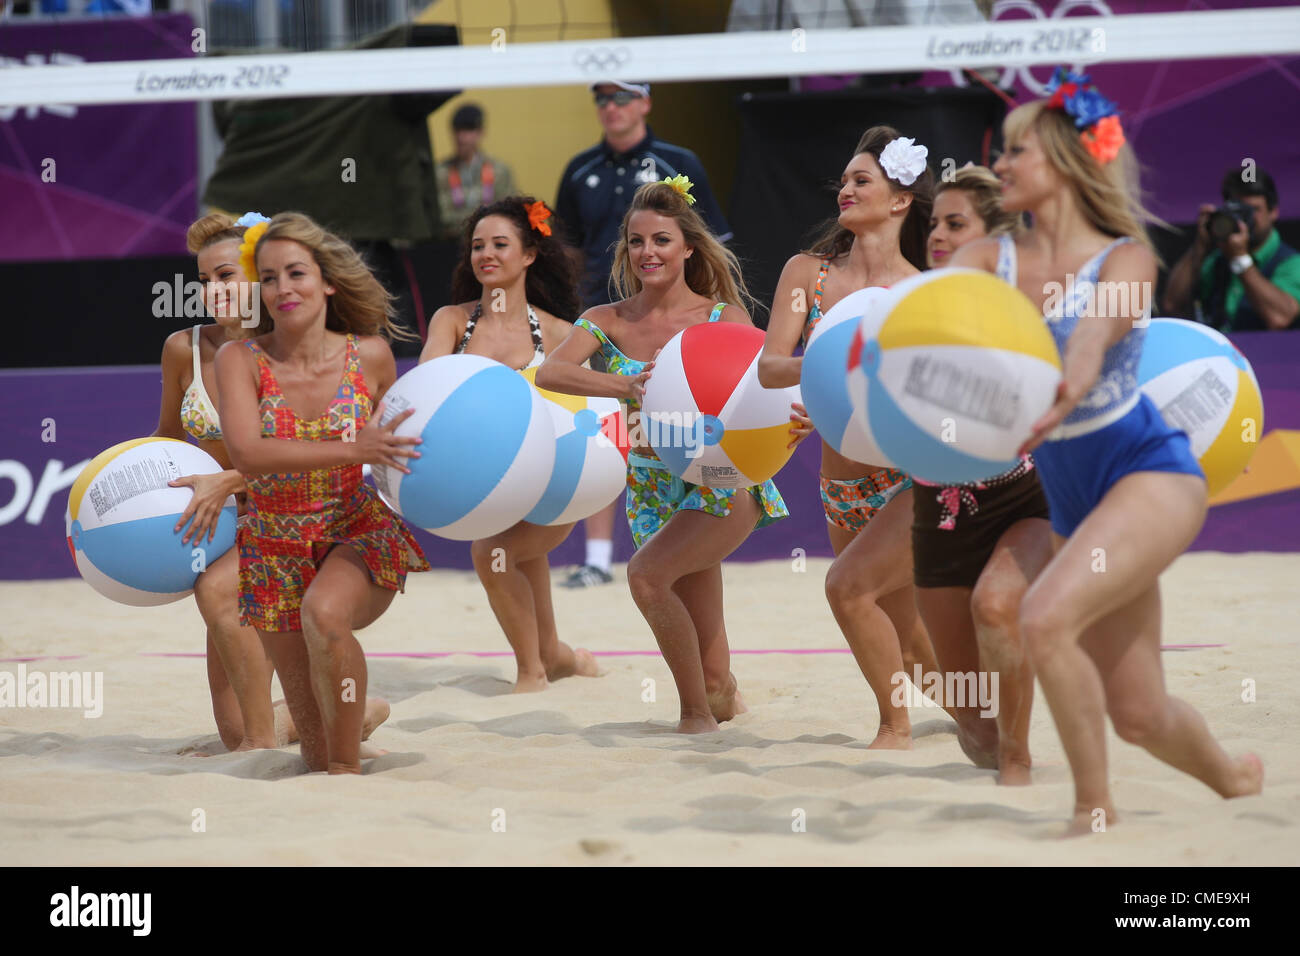 CHEER LEADERS WOMENS BEACH VOLLEYBALL HORSE GUARDS PARADE LONDON ENGLAND 29 July 2012 Stock Photo